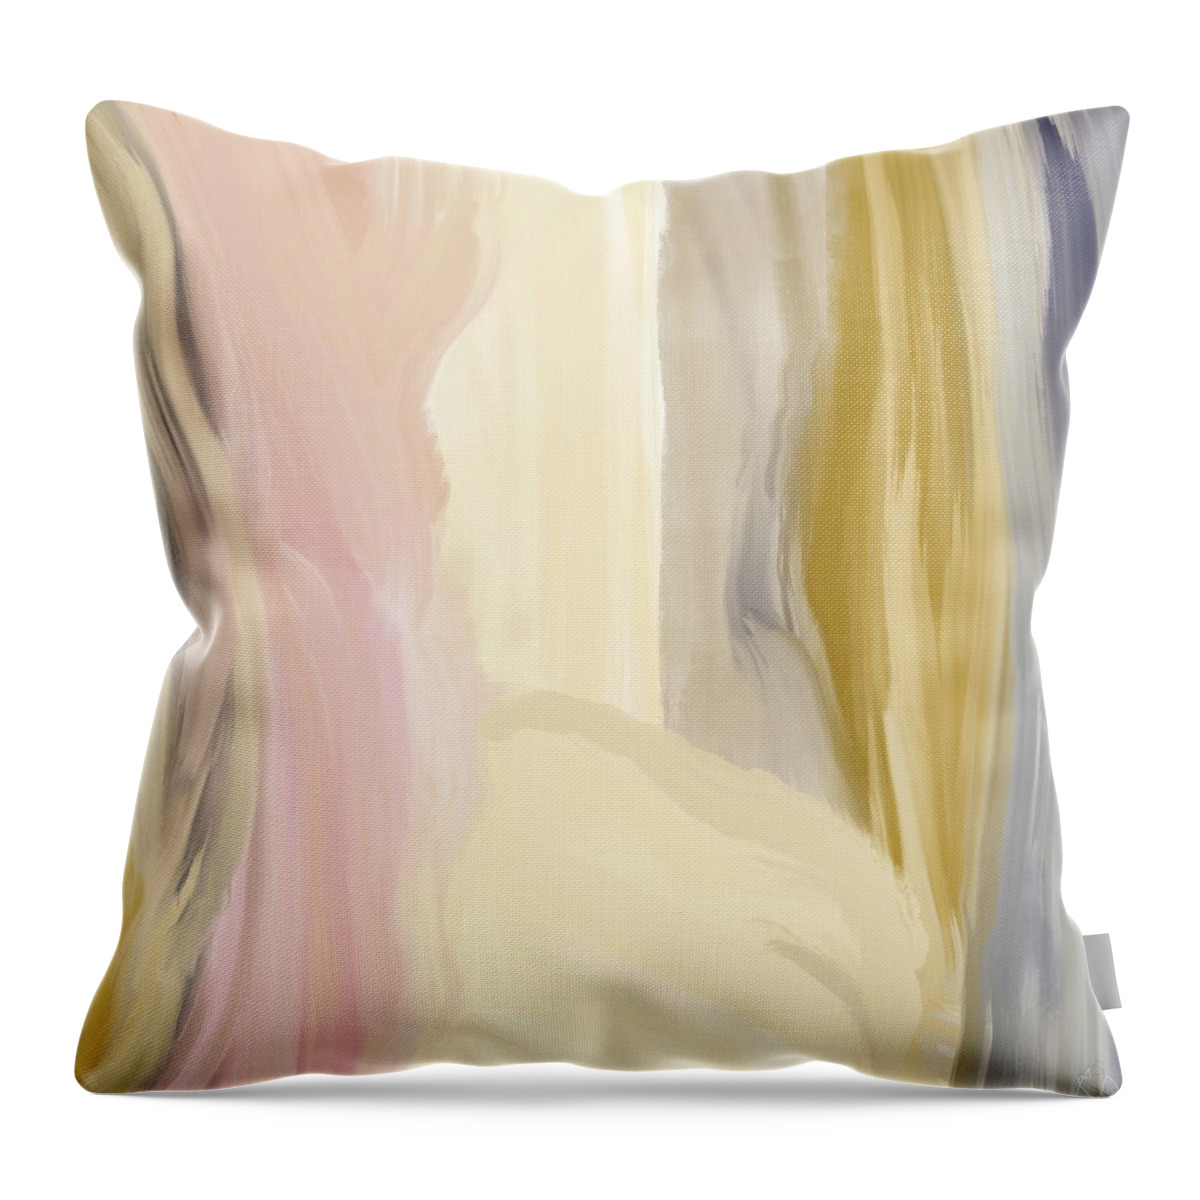 Oil Painting Throw Pillow featuring the digital art Excess by Ruth Harrigan